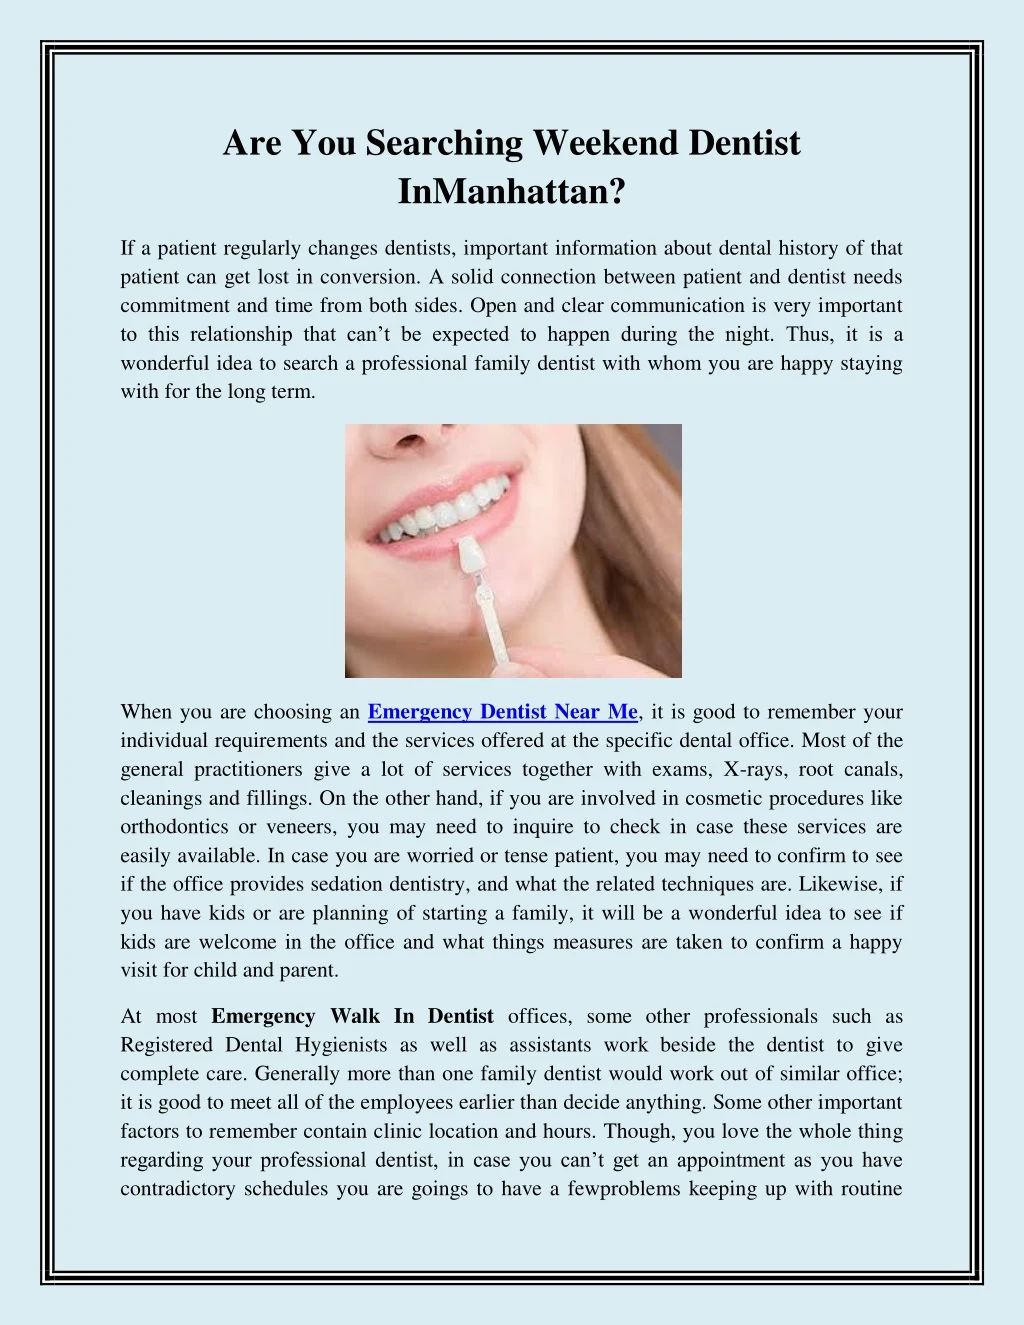 are you searching weekend dentist inmanhattan